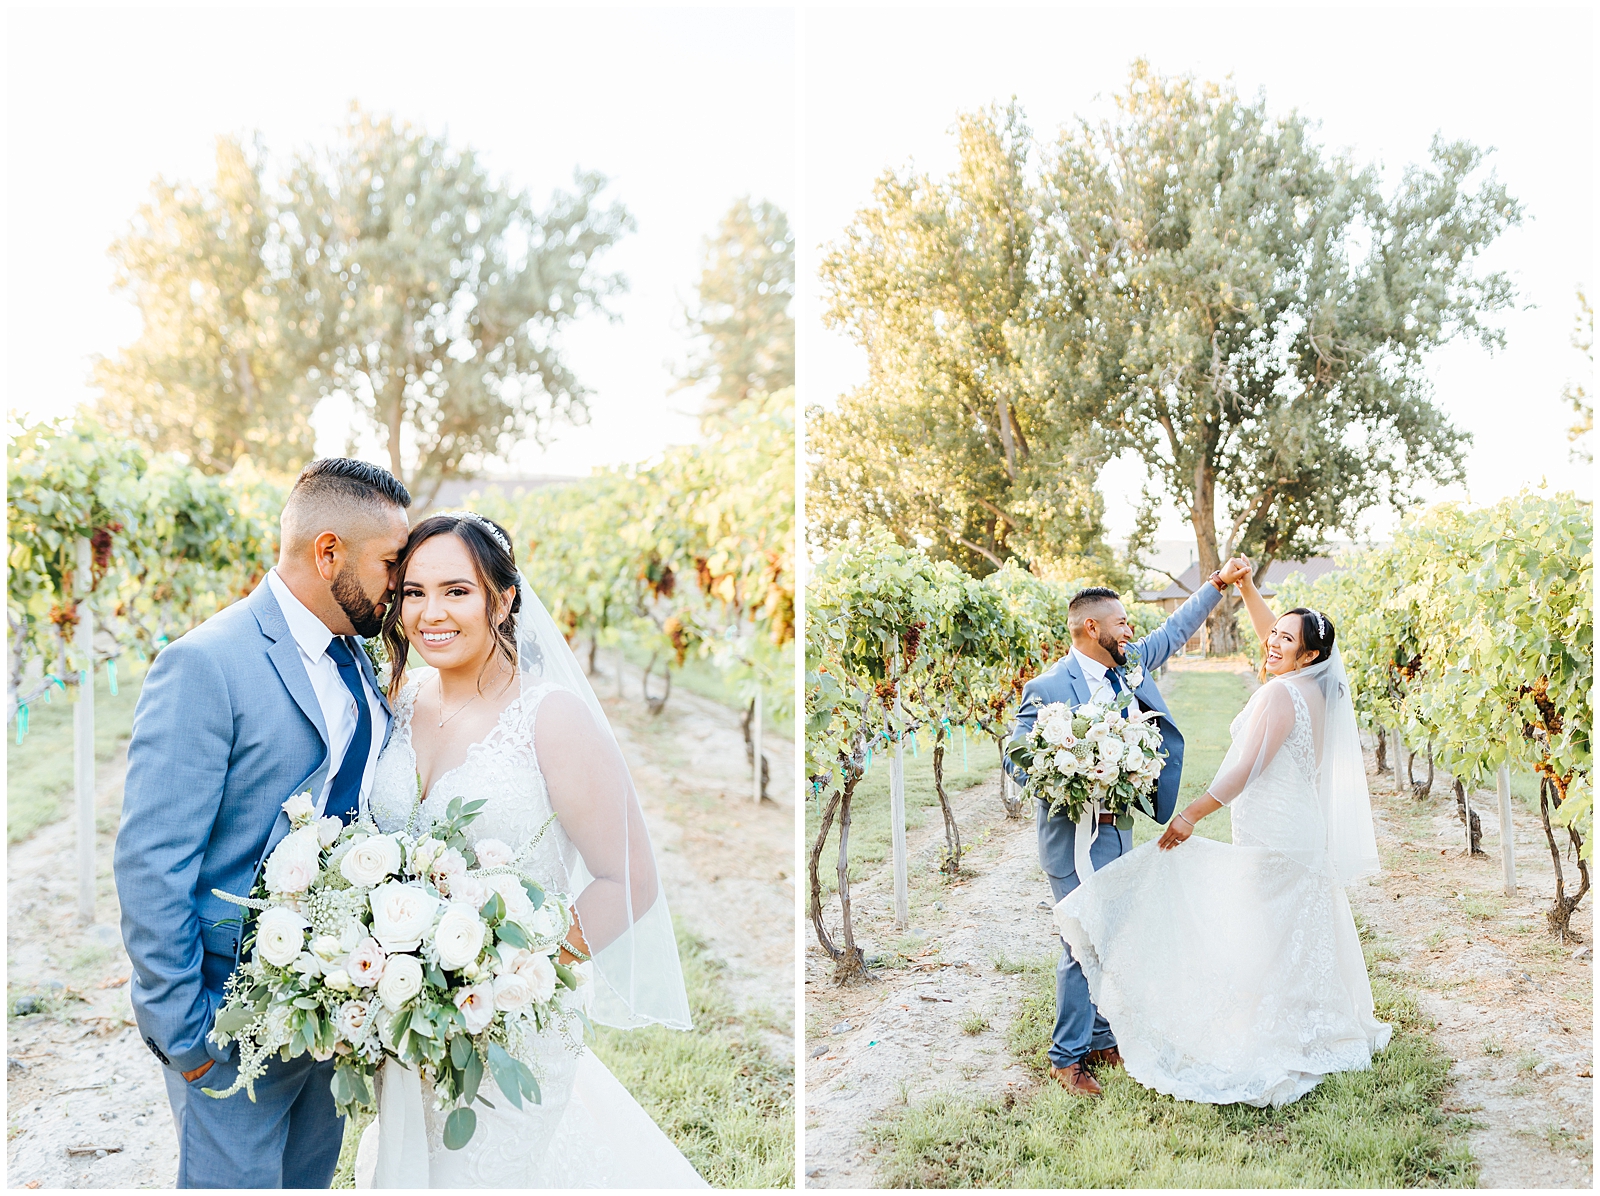 Twirling in the Vineyards During Husband and Wife Golden Hour Sunset Photos